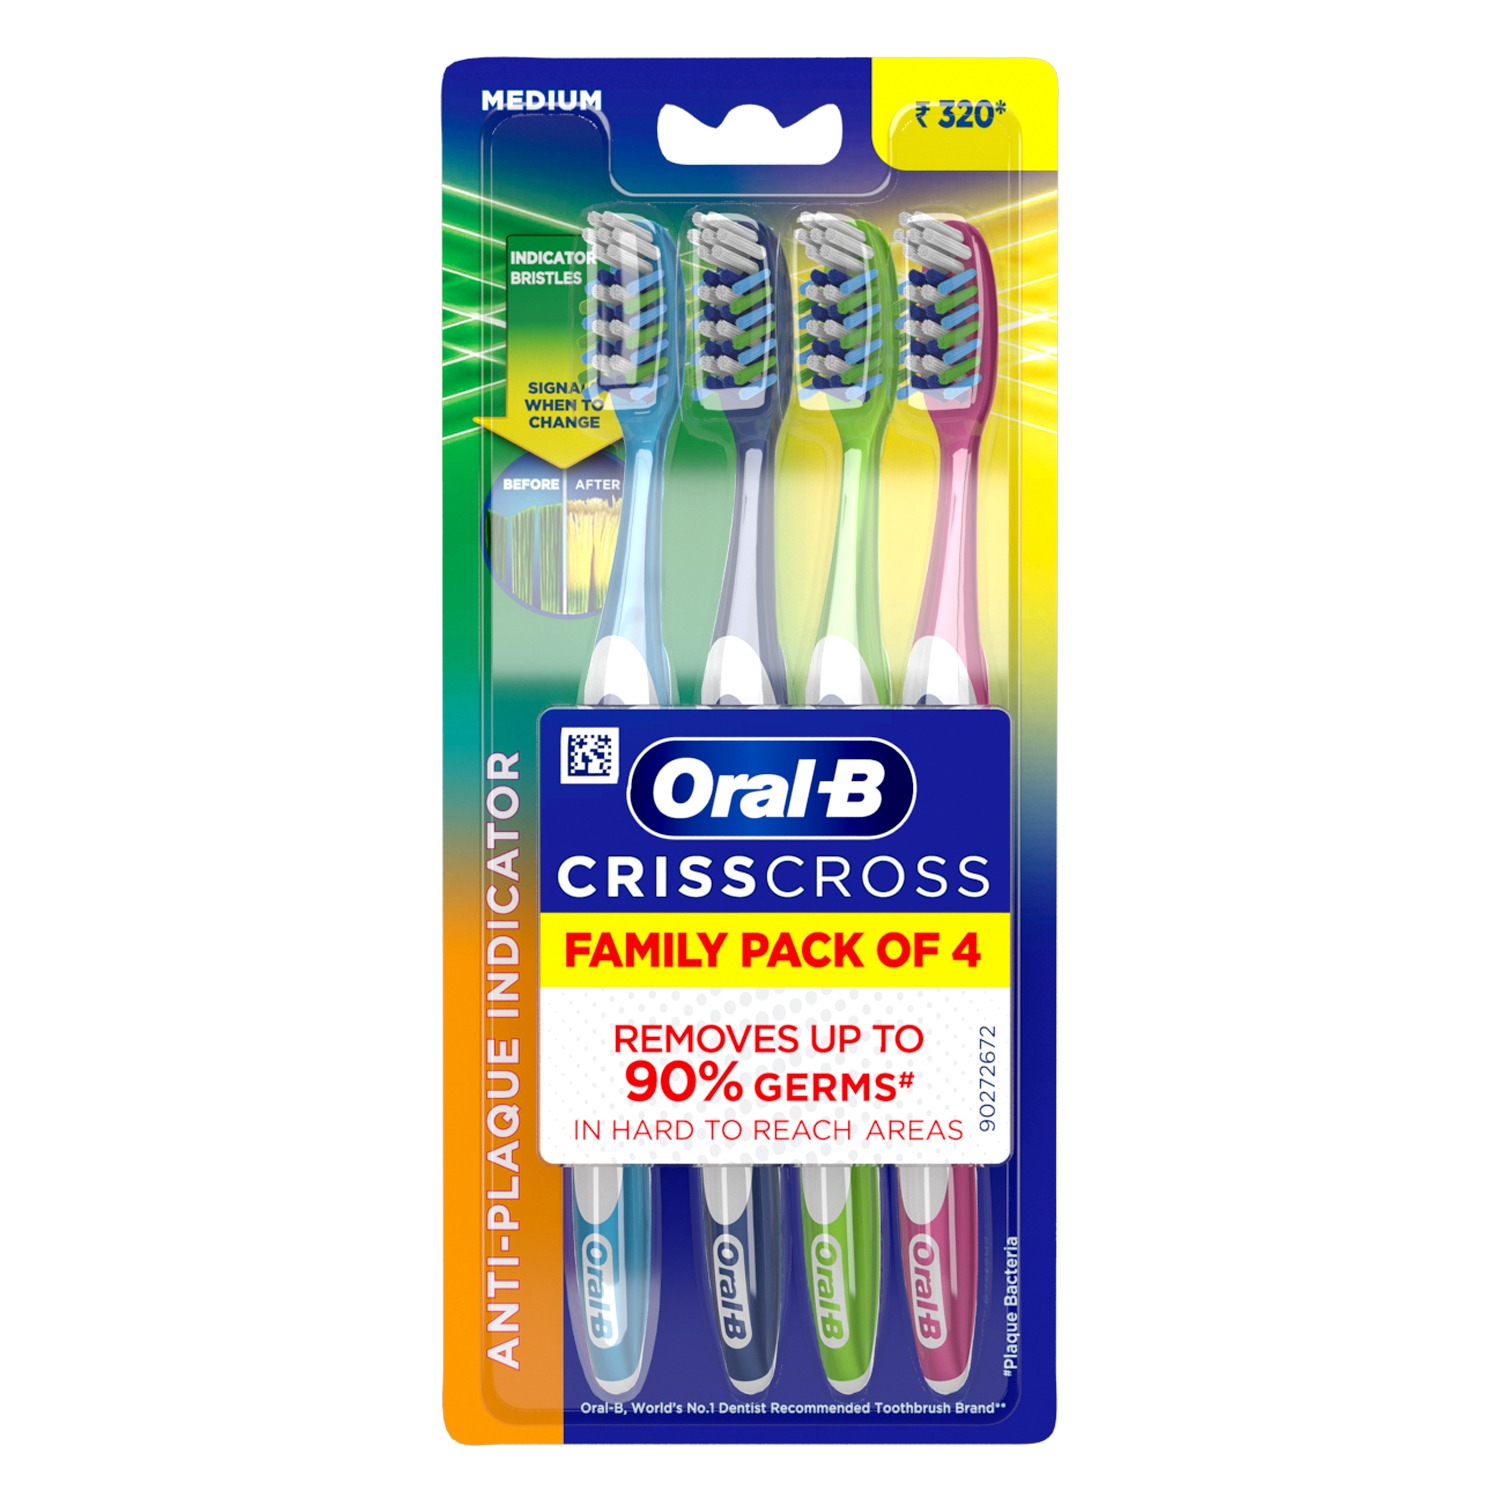 Oral B Criss Cross - Family pack of 4 toothbrushes – Medium